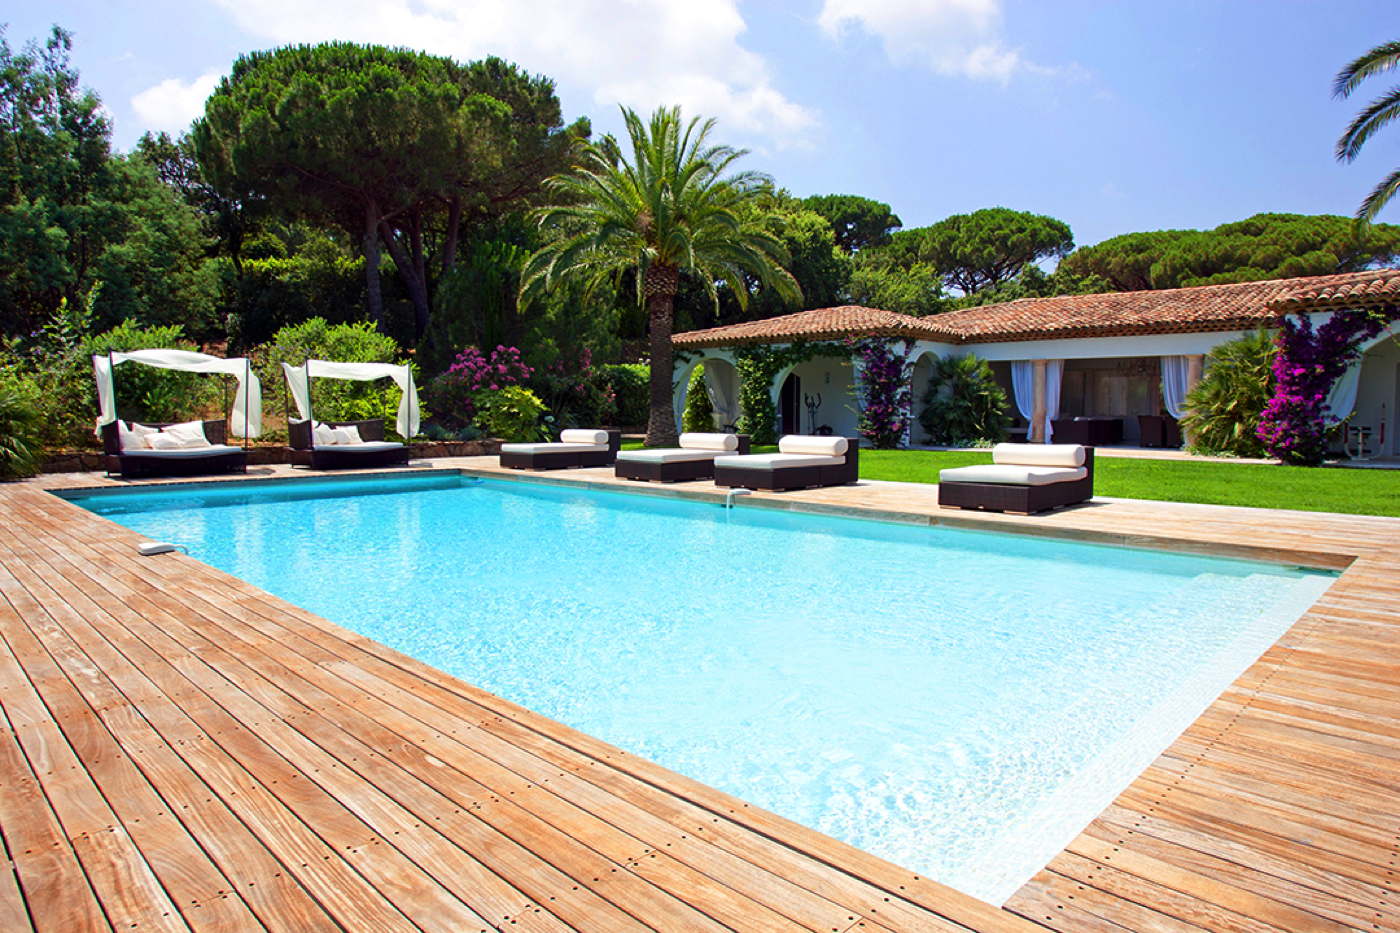 Luxury holiday rental villa offering stunning seaviews with private pool France Ramatuelle